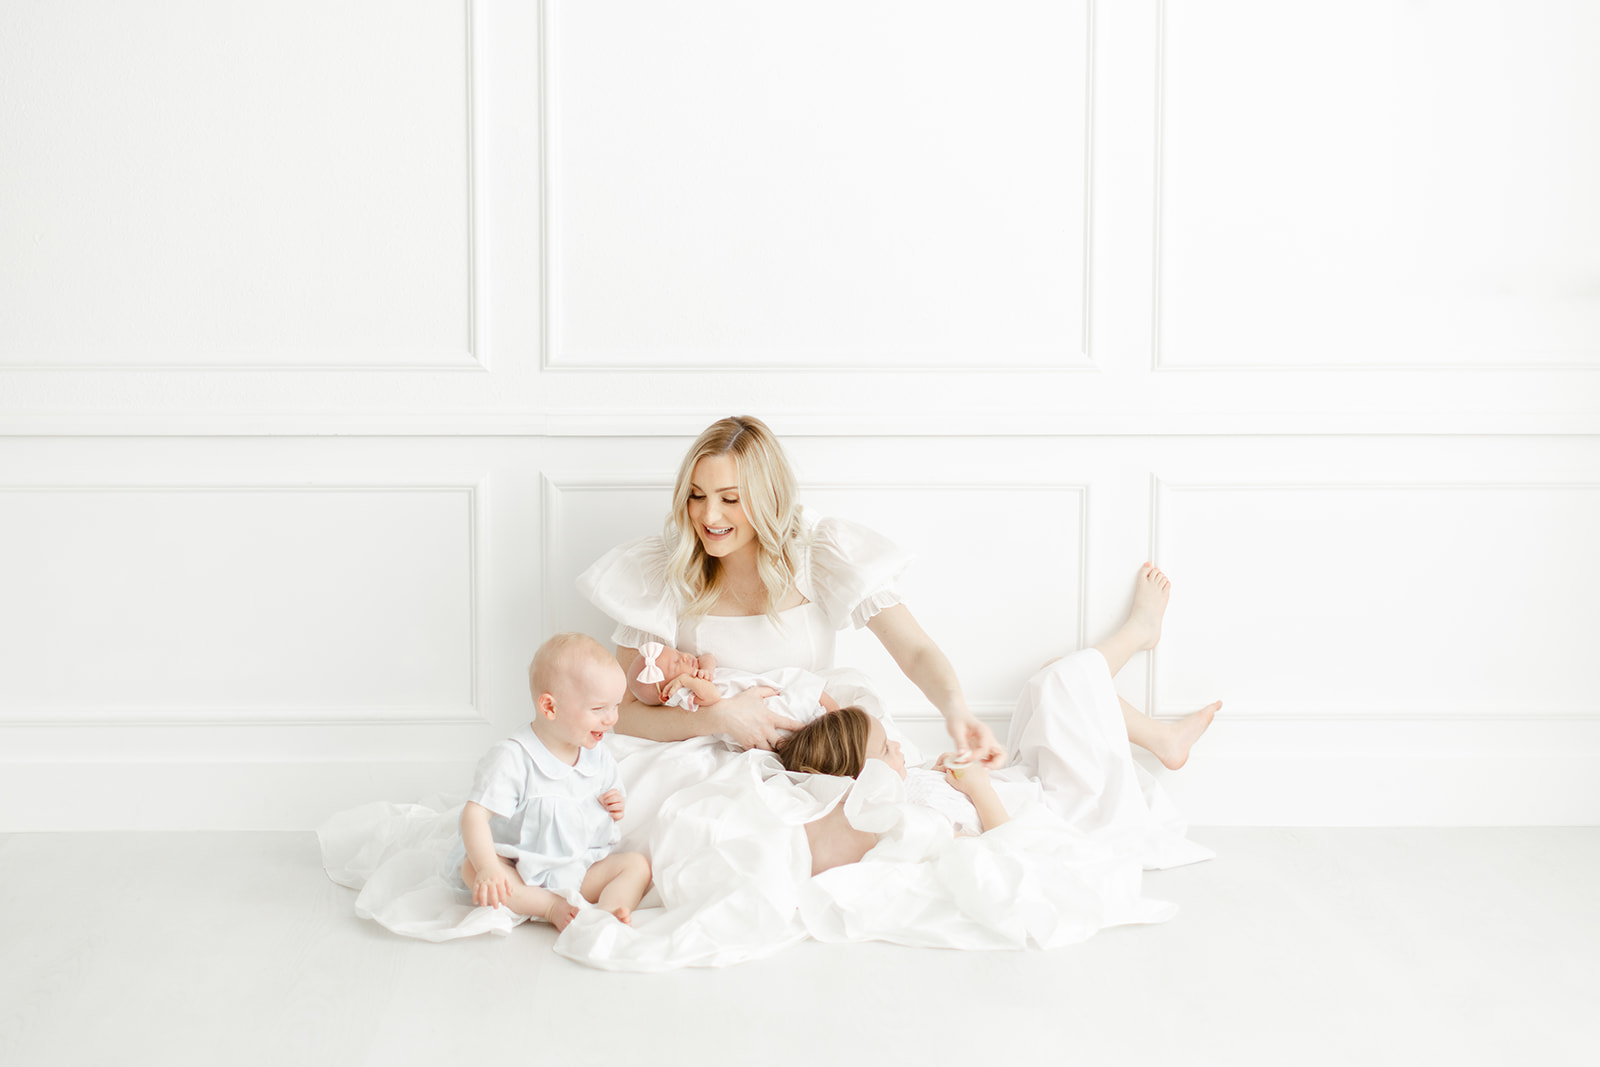 A mother in a white dress sits on the floor of a studio tickling and playing with her 2 toddlers and holding a sleeping newborn thanks to a Dallas Fertility Clinic